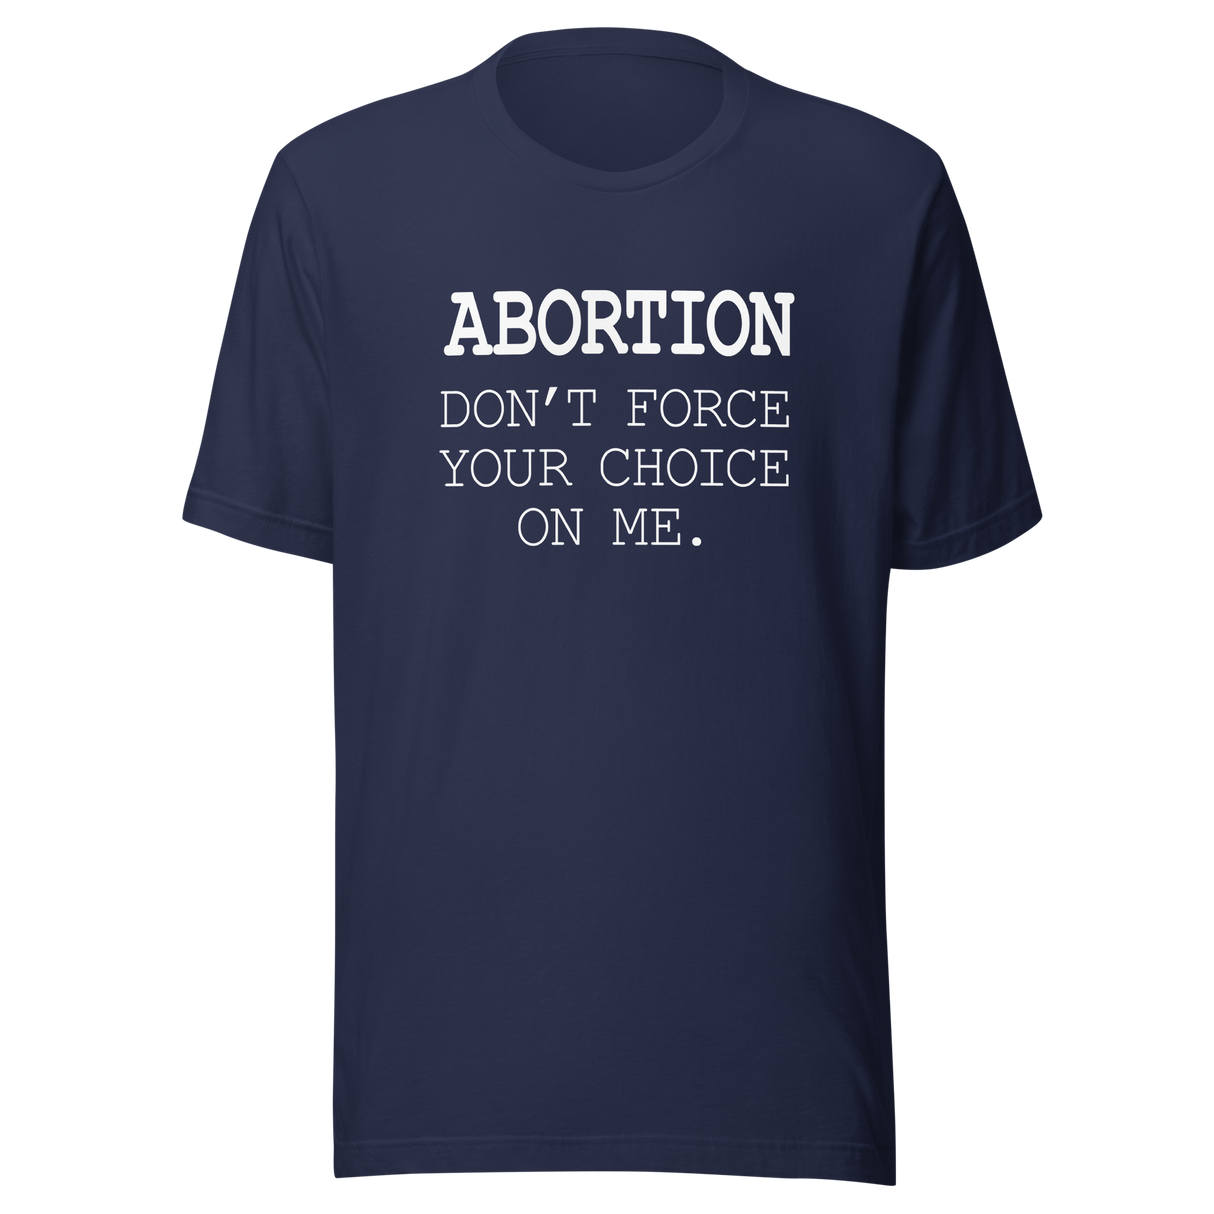 abortion-dont-force-your-choice-on-me-abortion-tee-uterus-t-shirt-women-tee-womens-rights-t-shirt-healthcare-tee#color_navy